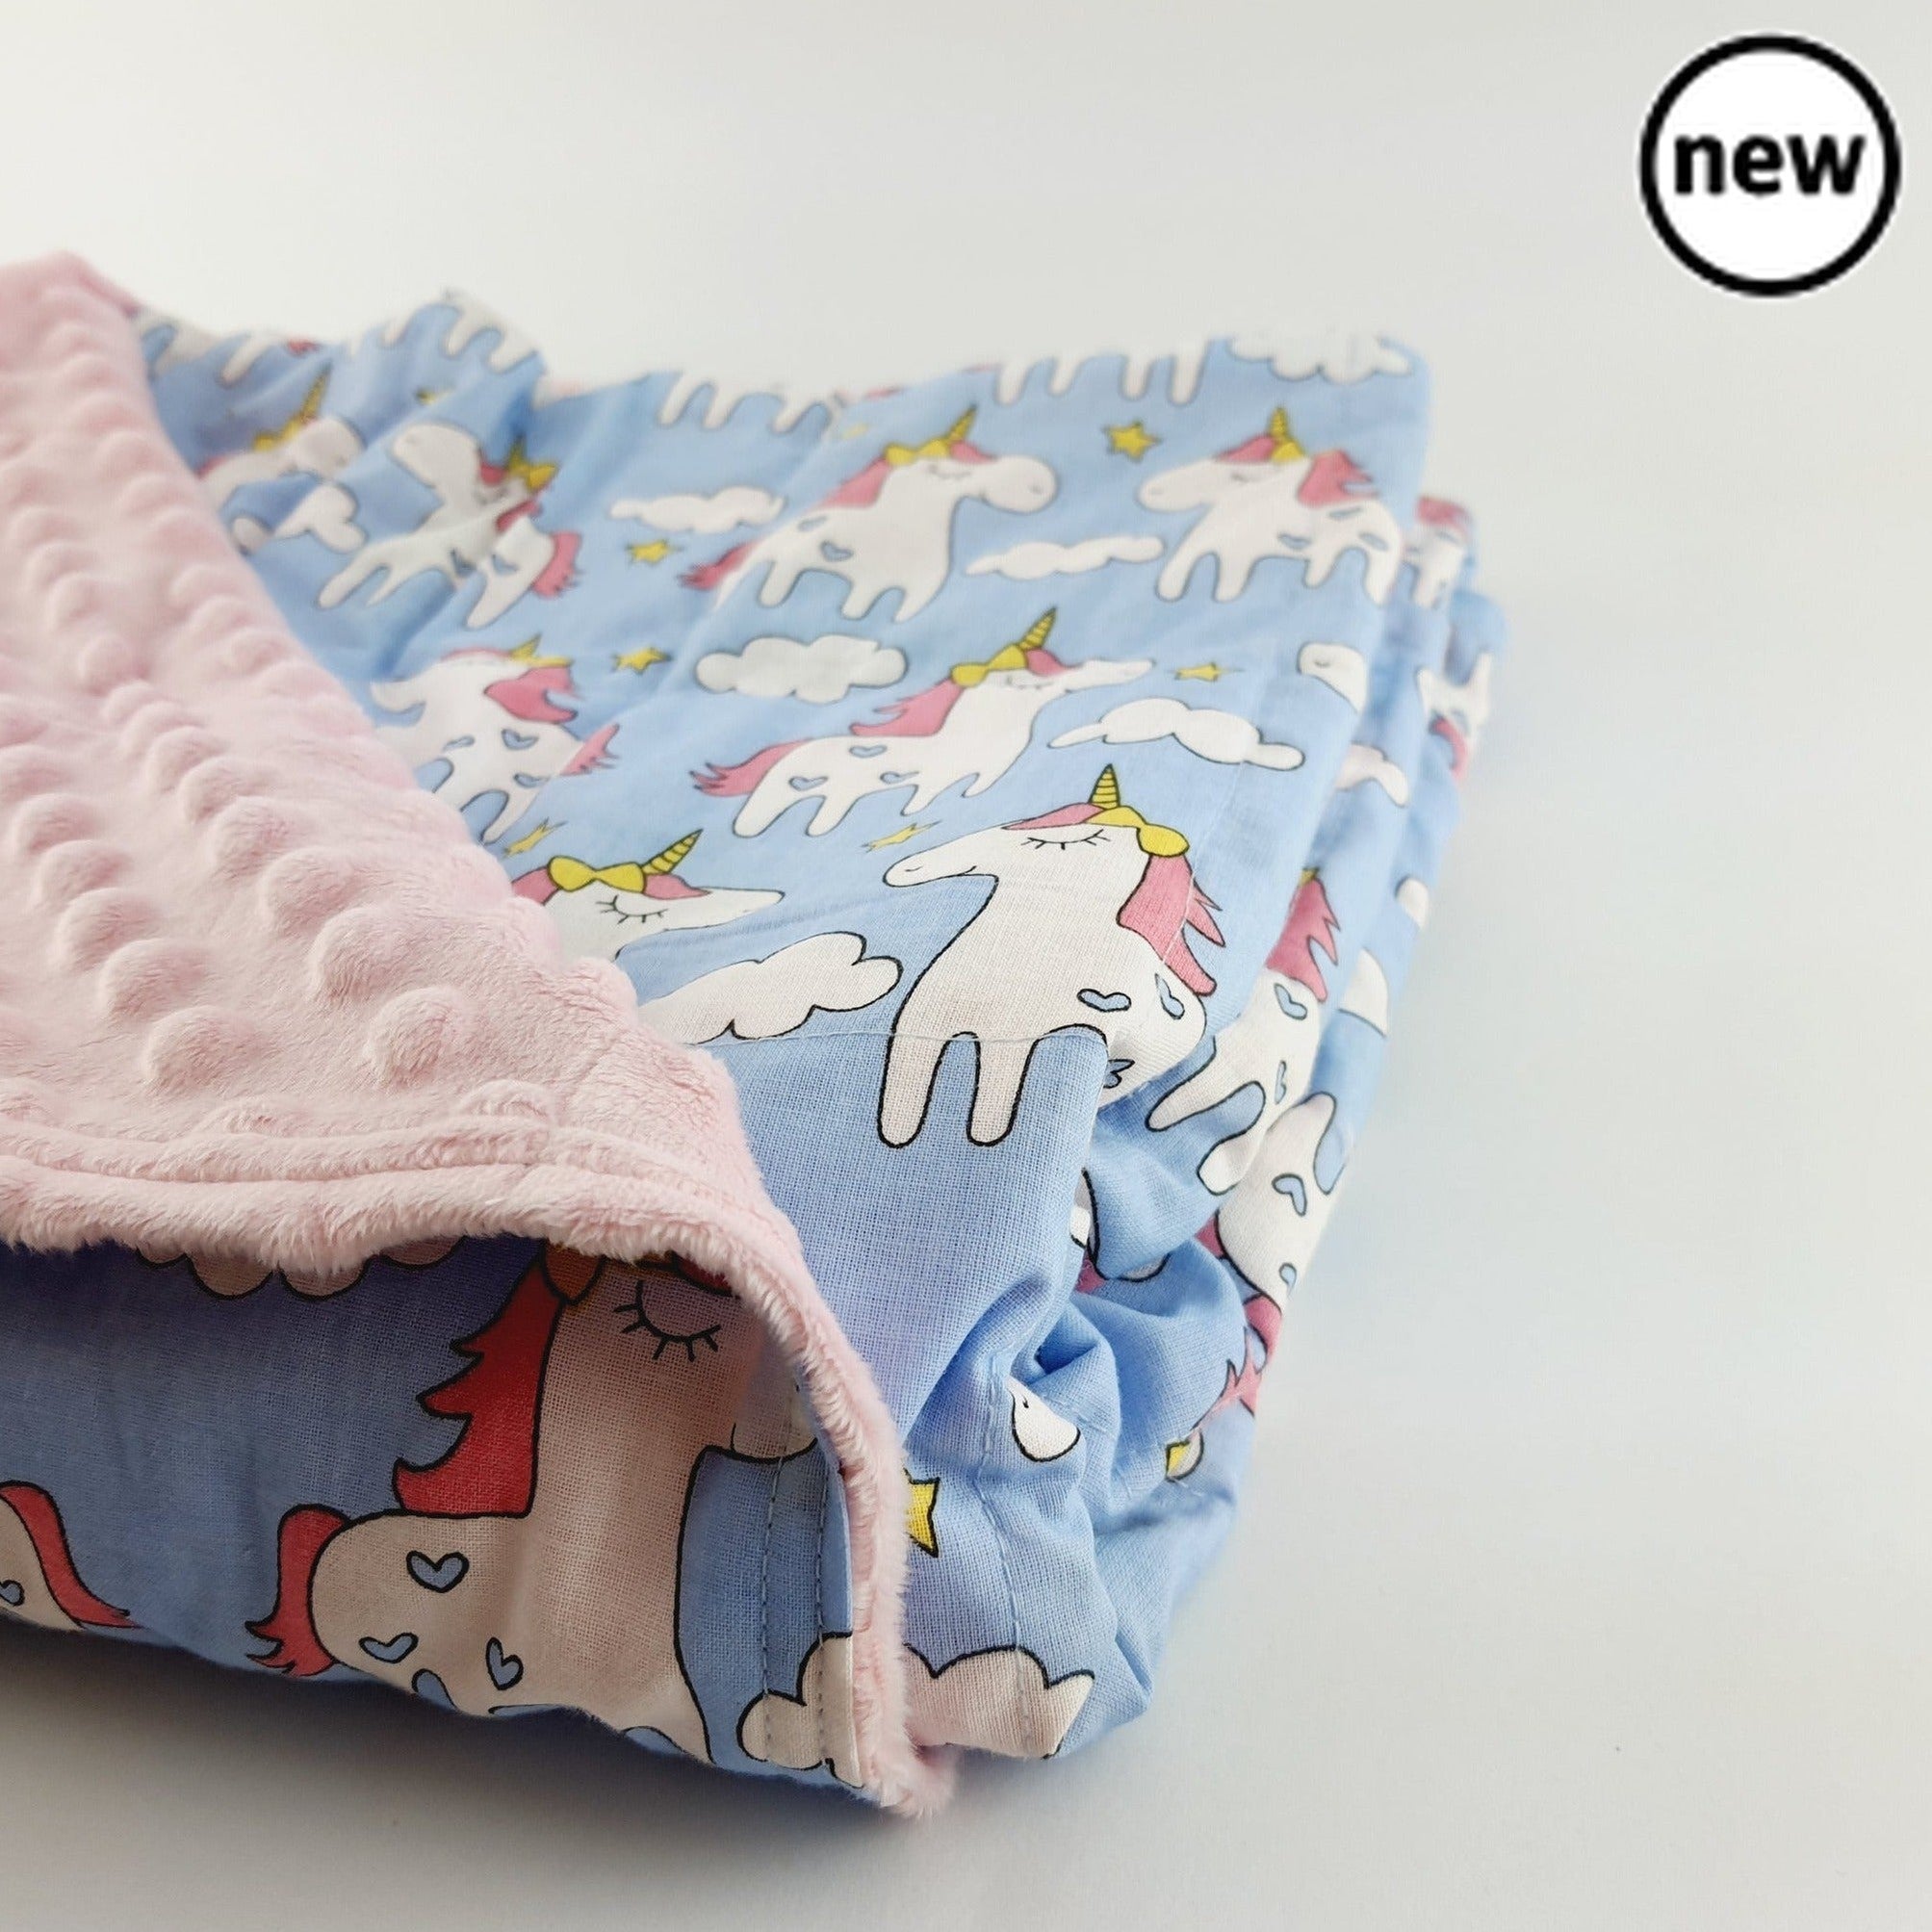 Unicorns Cotton Weighted Blanket, Introducing our Unicorns Cotton Weighted Blanket – a magical blend of comfort and individuality. Handmade from start to finish, this 100% unicorns cotton weighted blanket offers a personalized touch to meet your unique preferences. With customizable options for size, weight, filling, and backing fabric, it's your very own creation designed for all age groups. Key Features: Handmade Excellence: Immerse yourself in the enchanting world of unicorns with our entirely handmade w